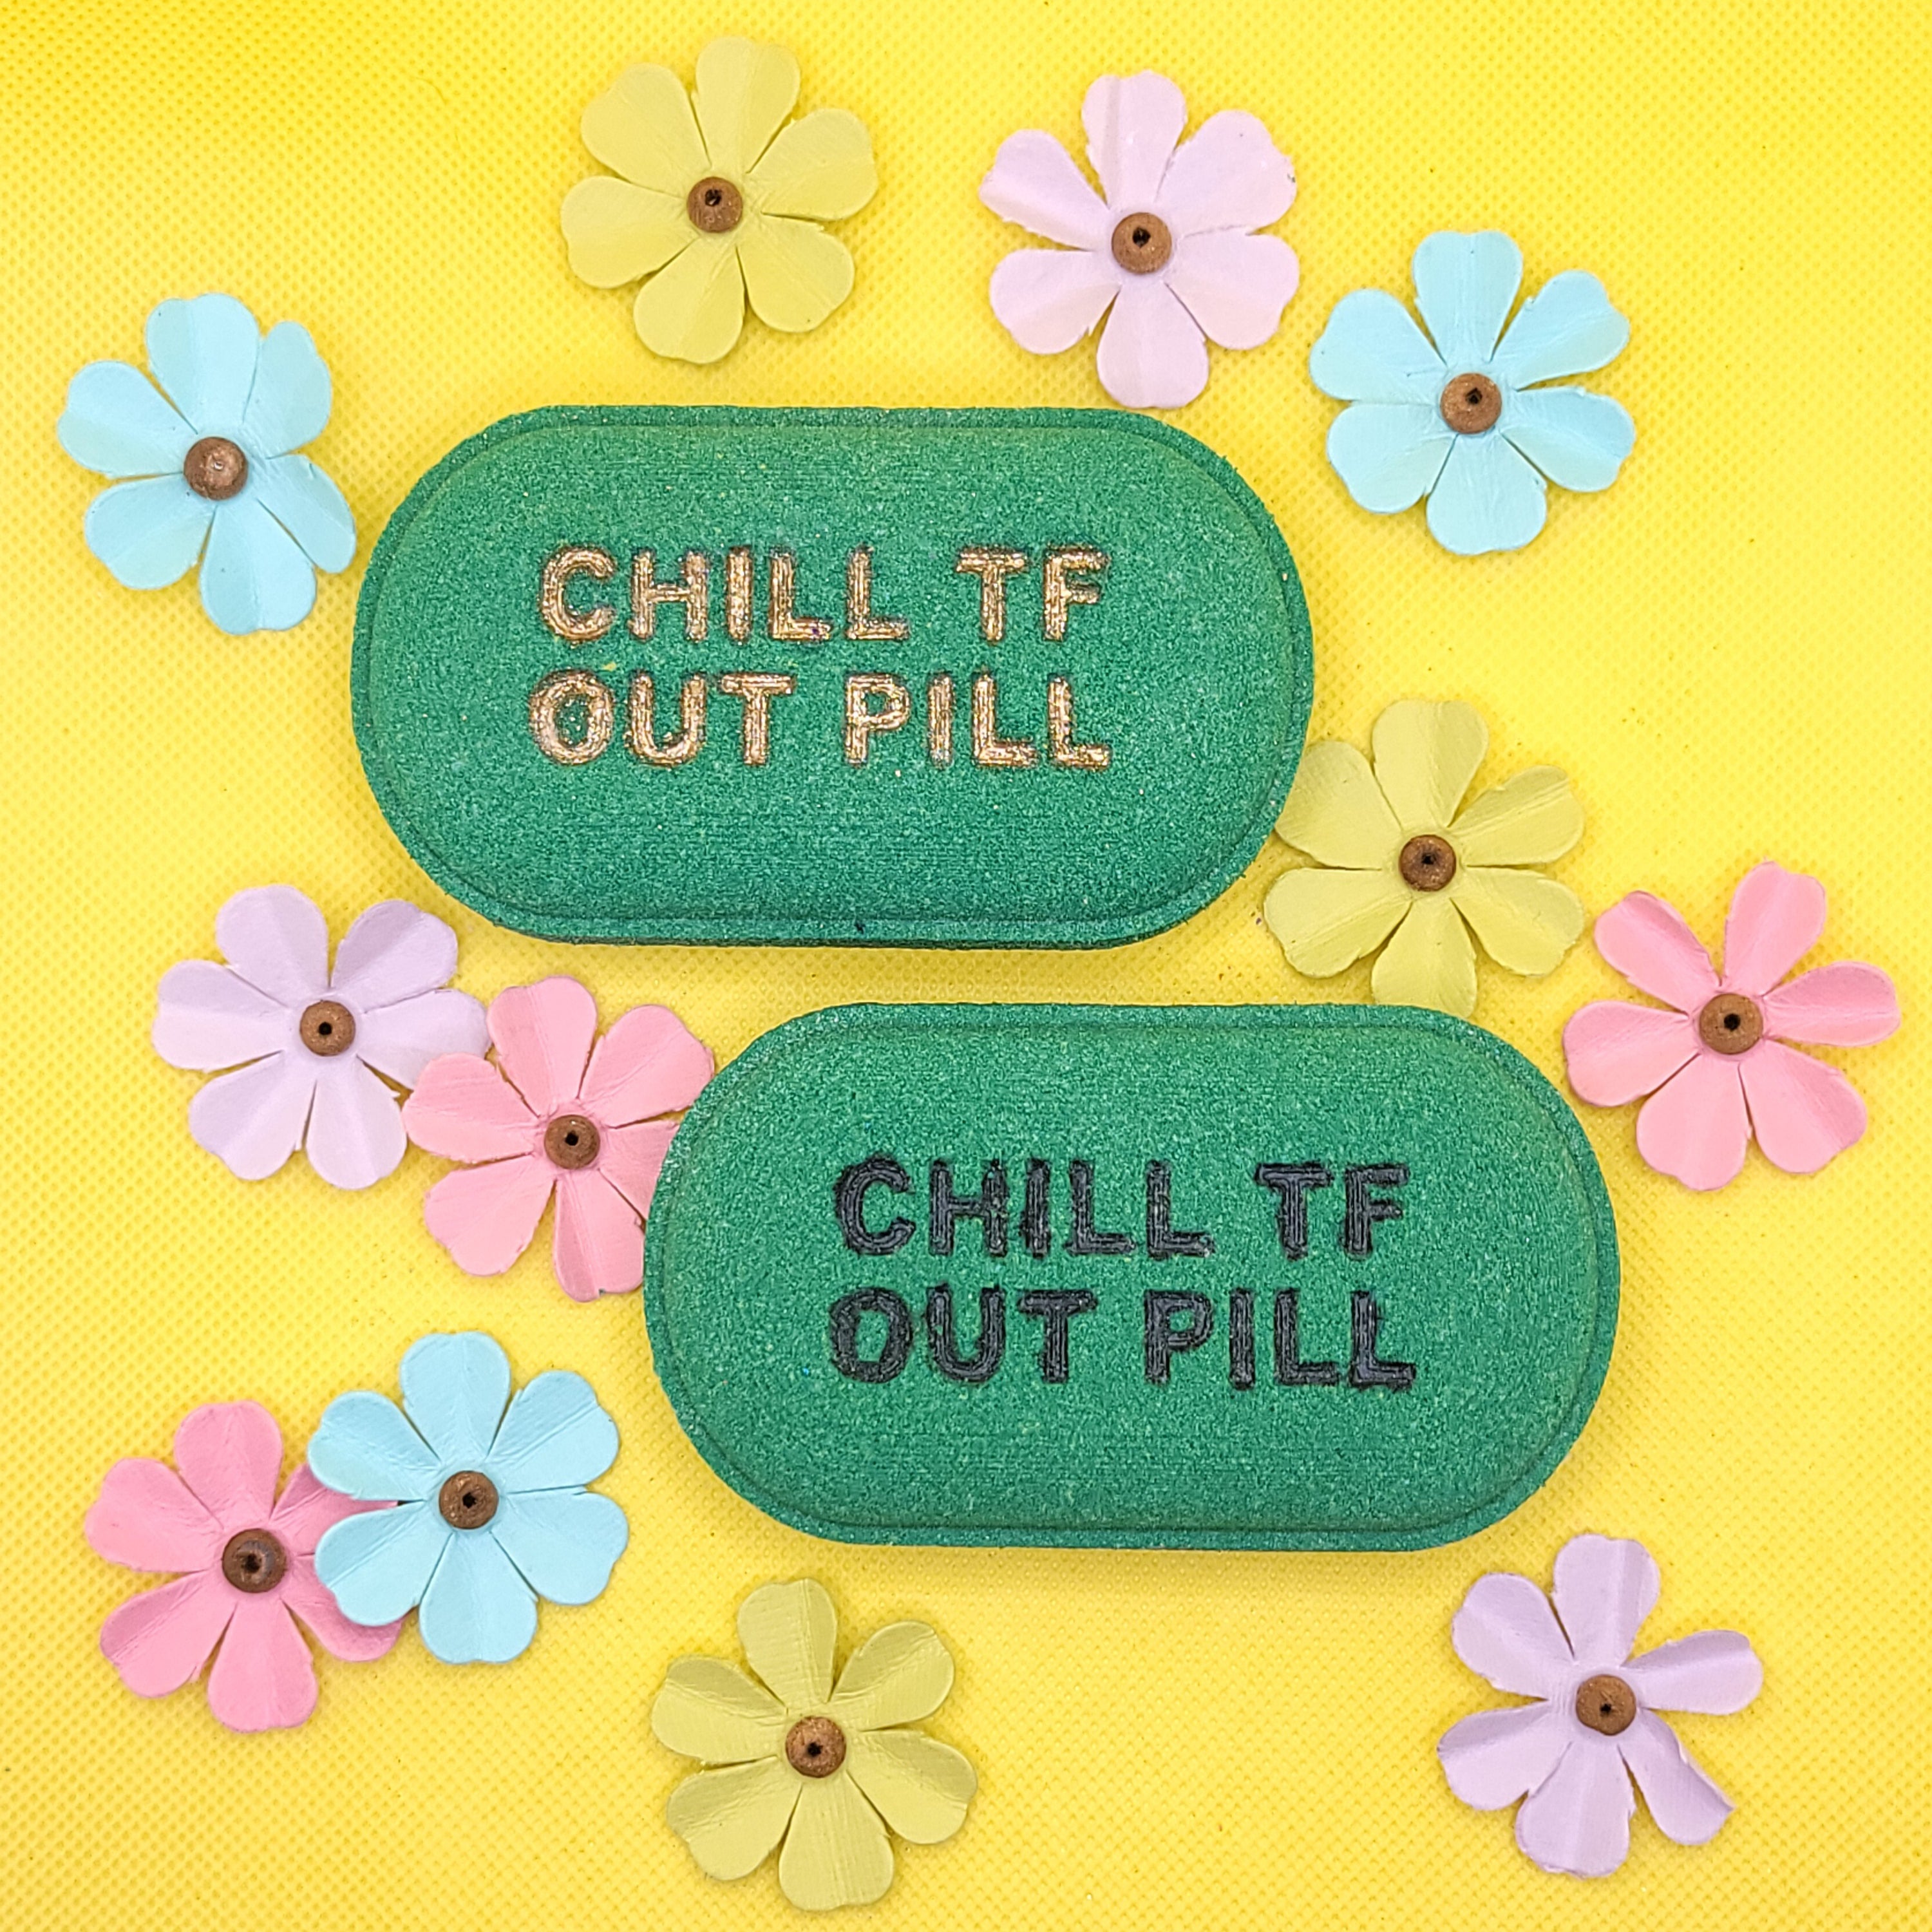 Chill TF Out Pill